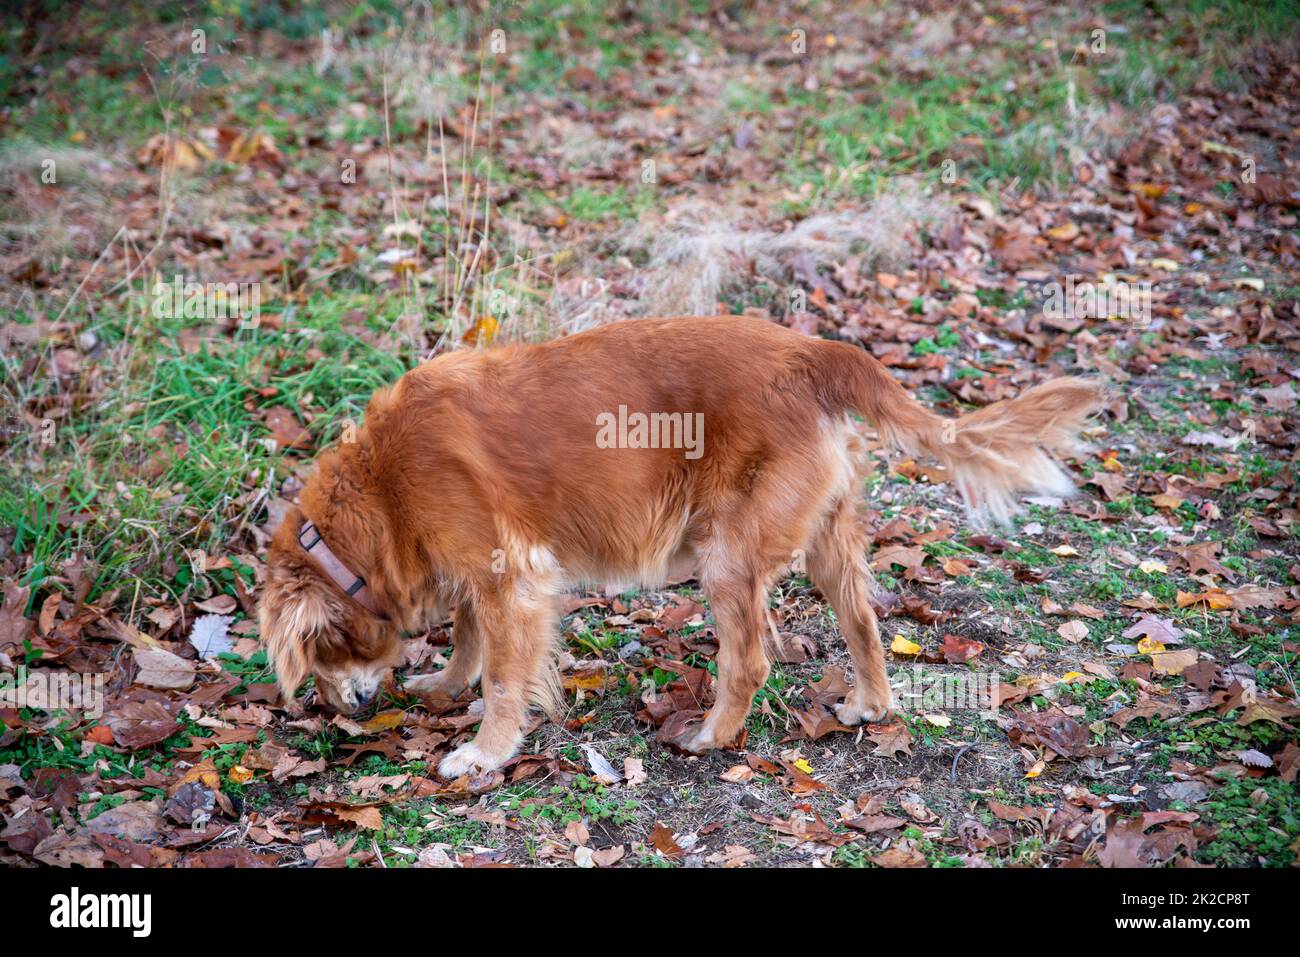 Golden Retriever hunting dog sniffs the ground in autumn landscape Stock Photo